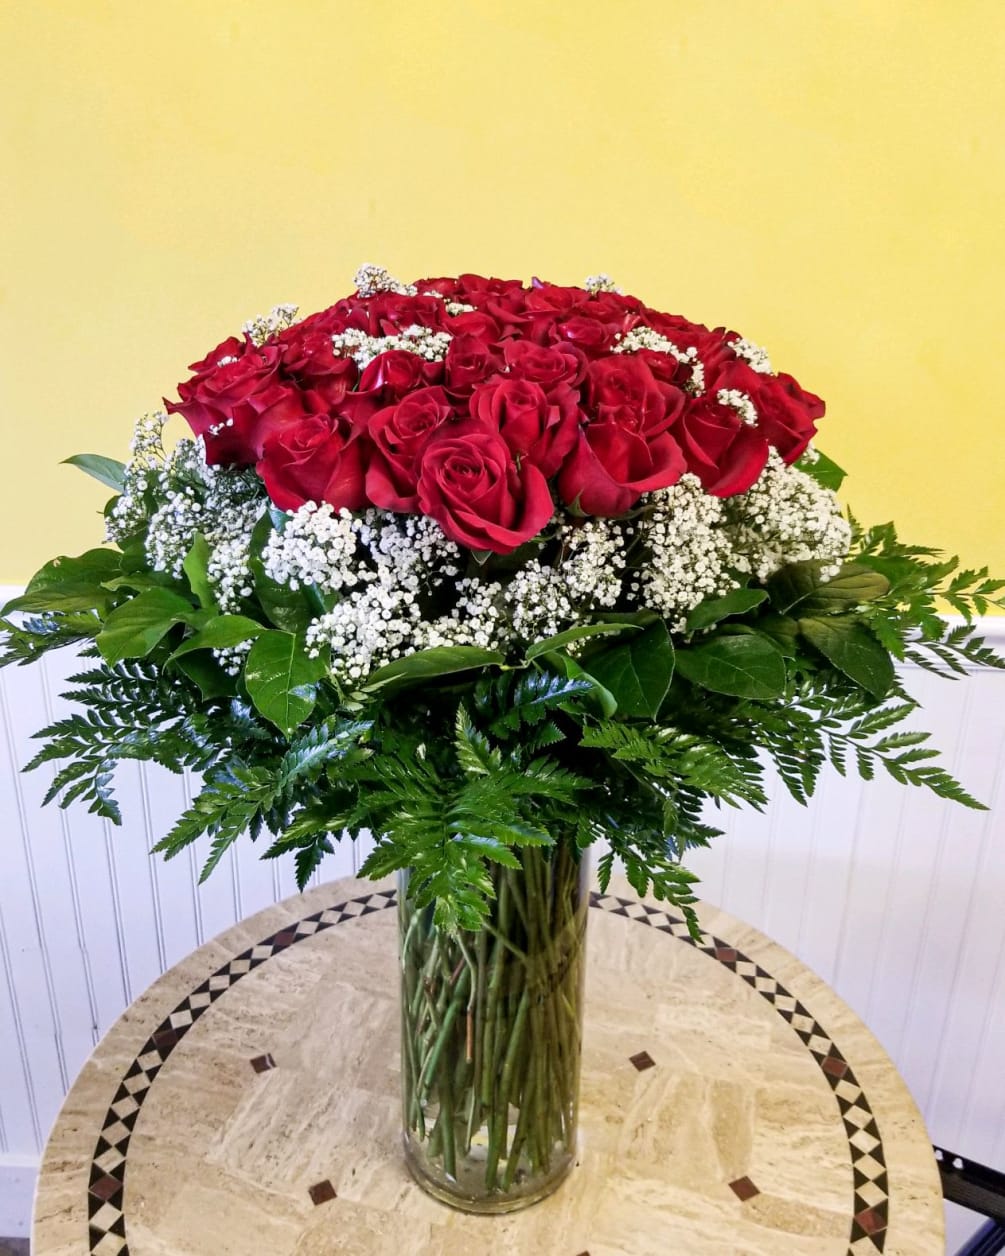 Have a Special Occasion coming up? Send this  arrangement of 50